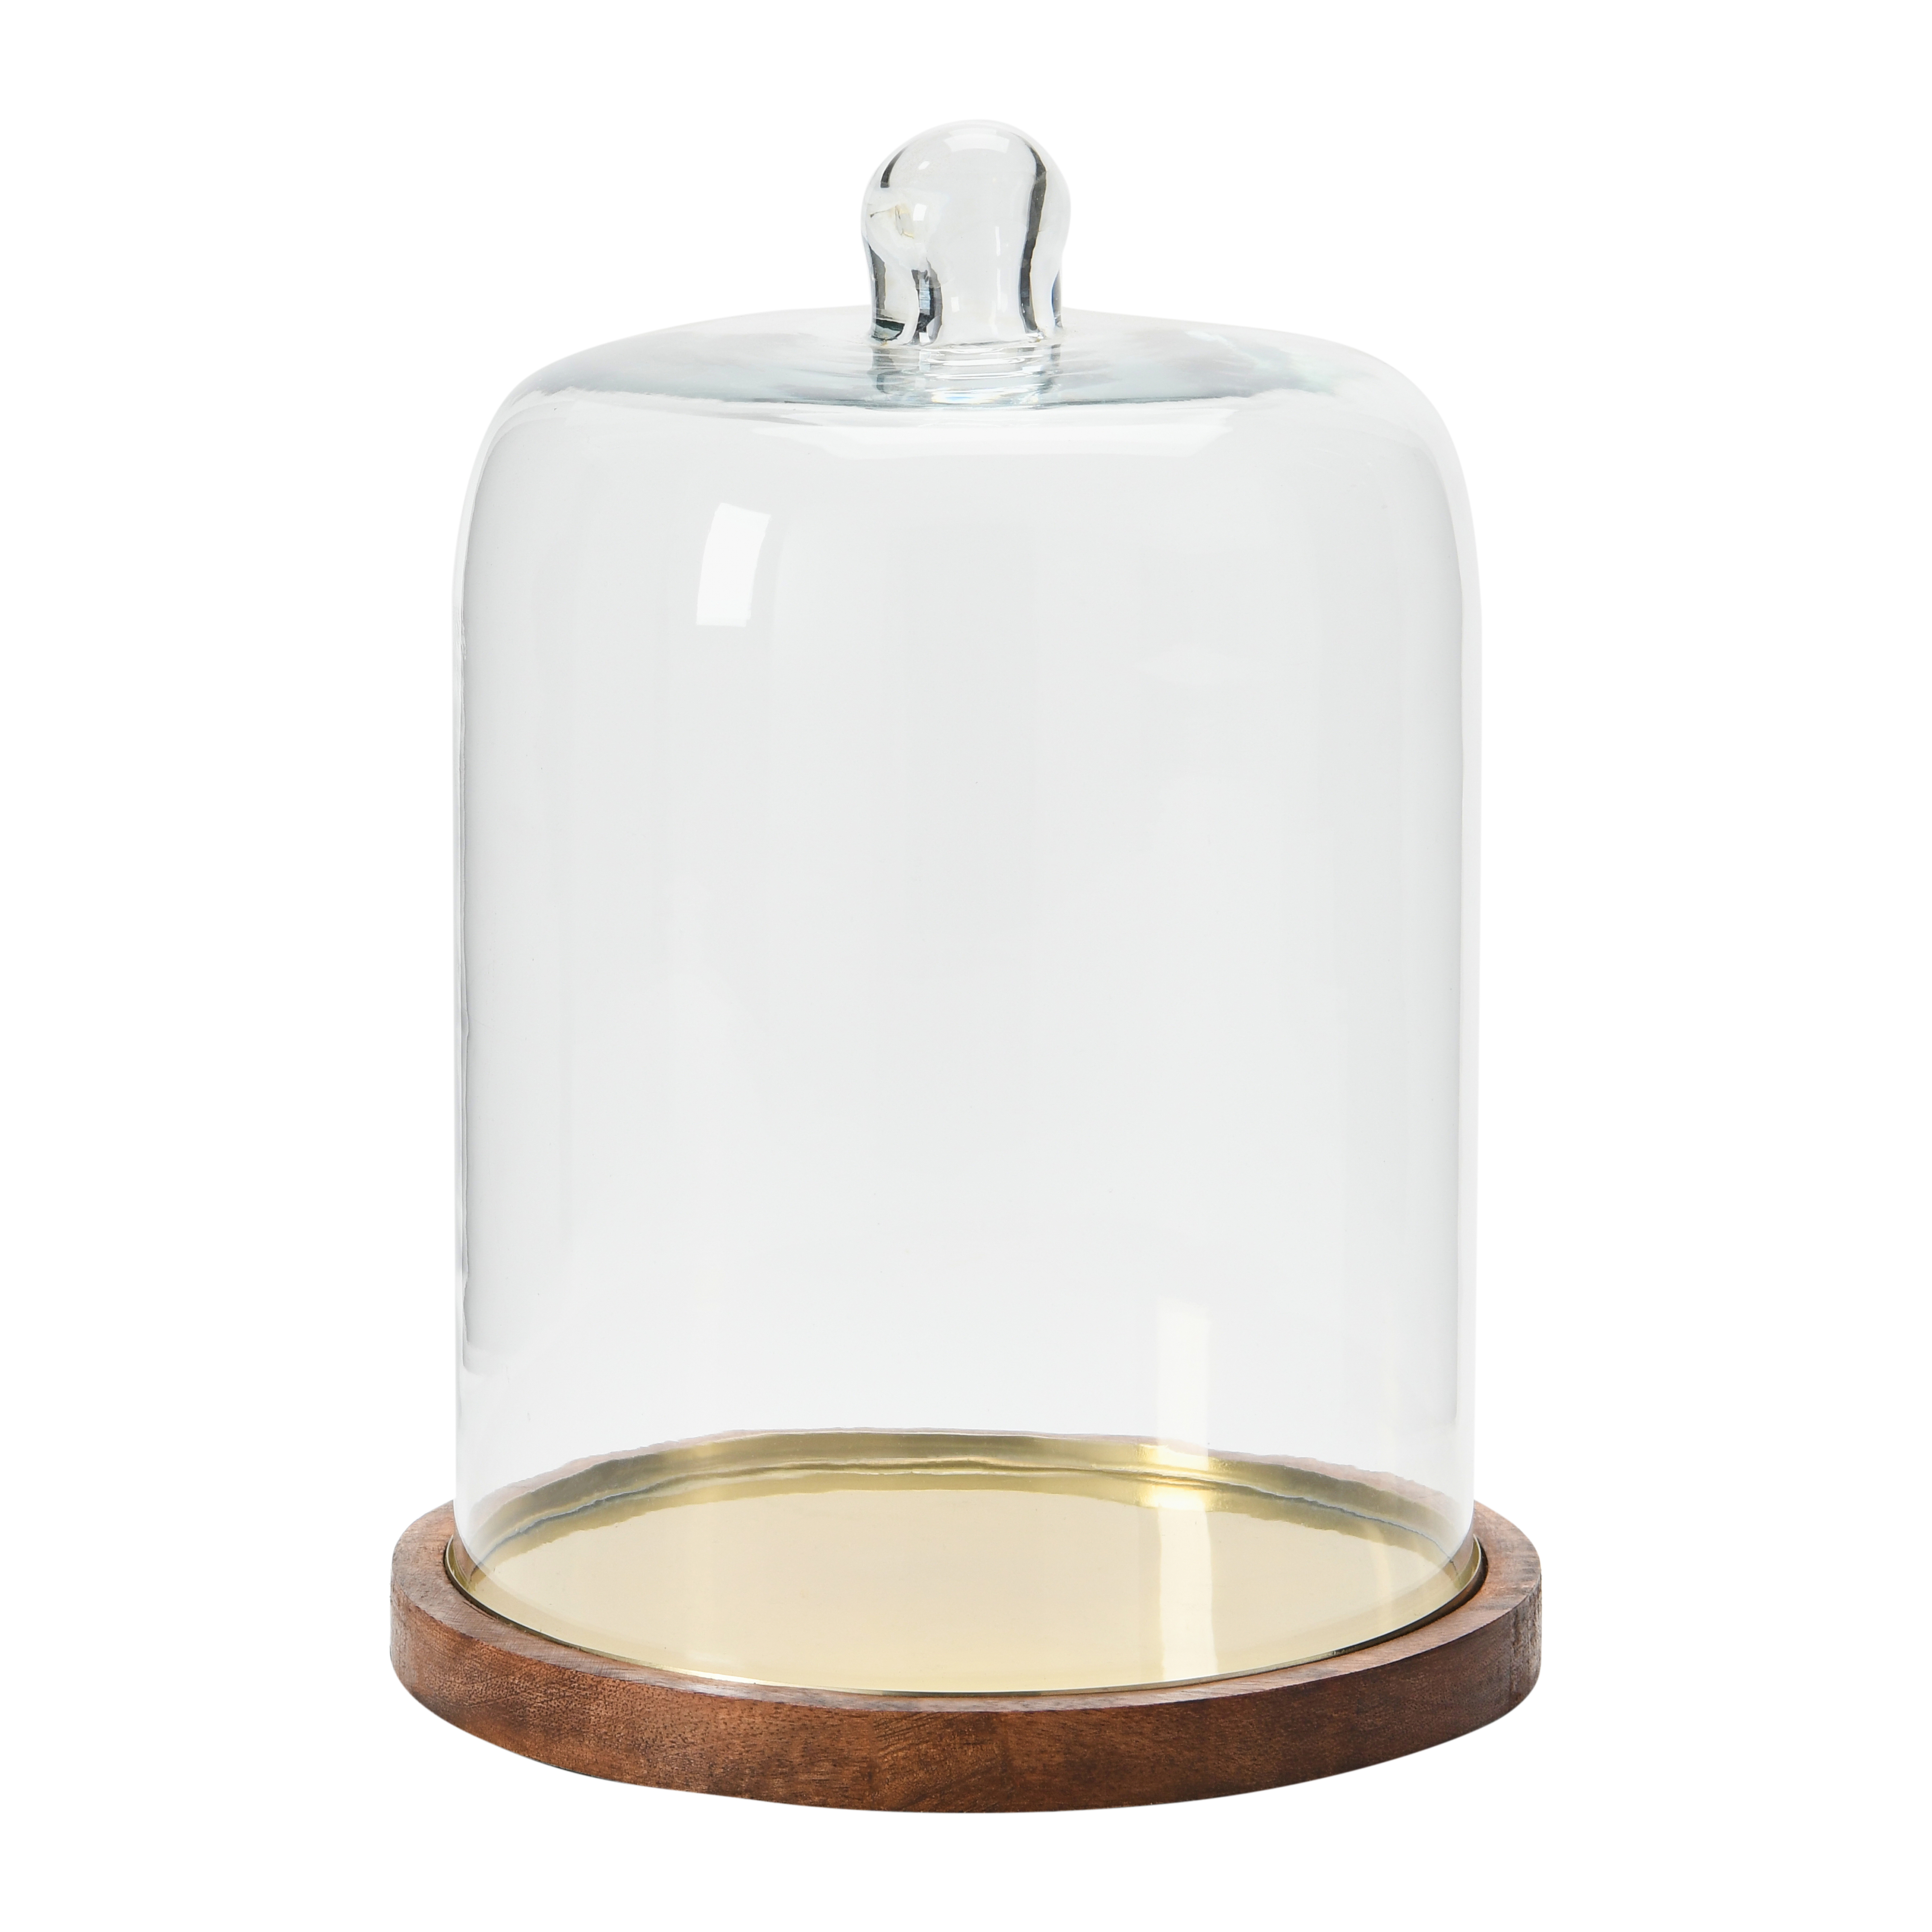 Glass Cloche with Wood & Metal Base, Set of 2 - Nomad Home